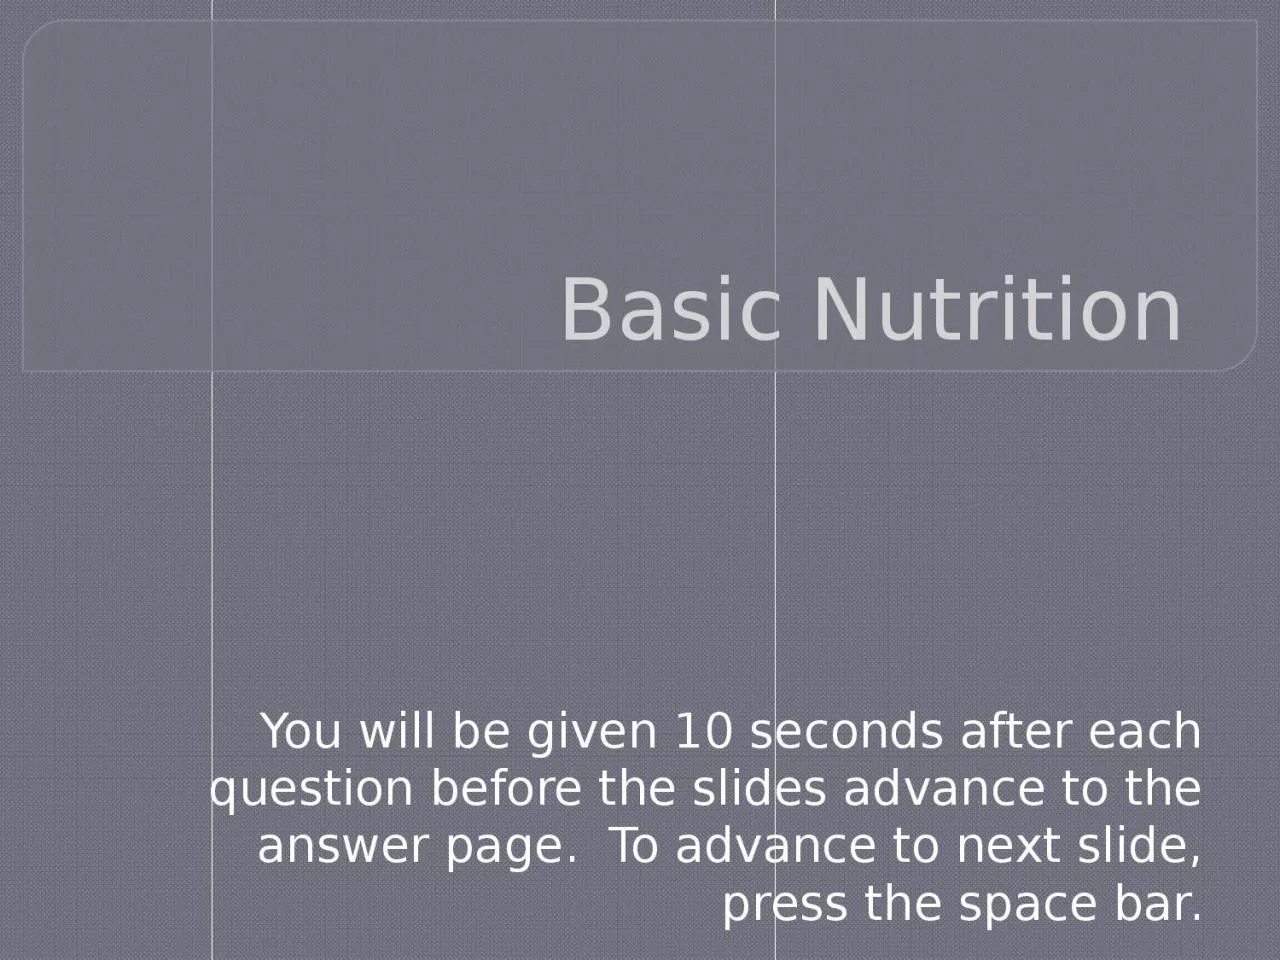 Basic Nutrition You will be given 10 seconds after each question before the slides advance